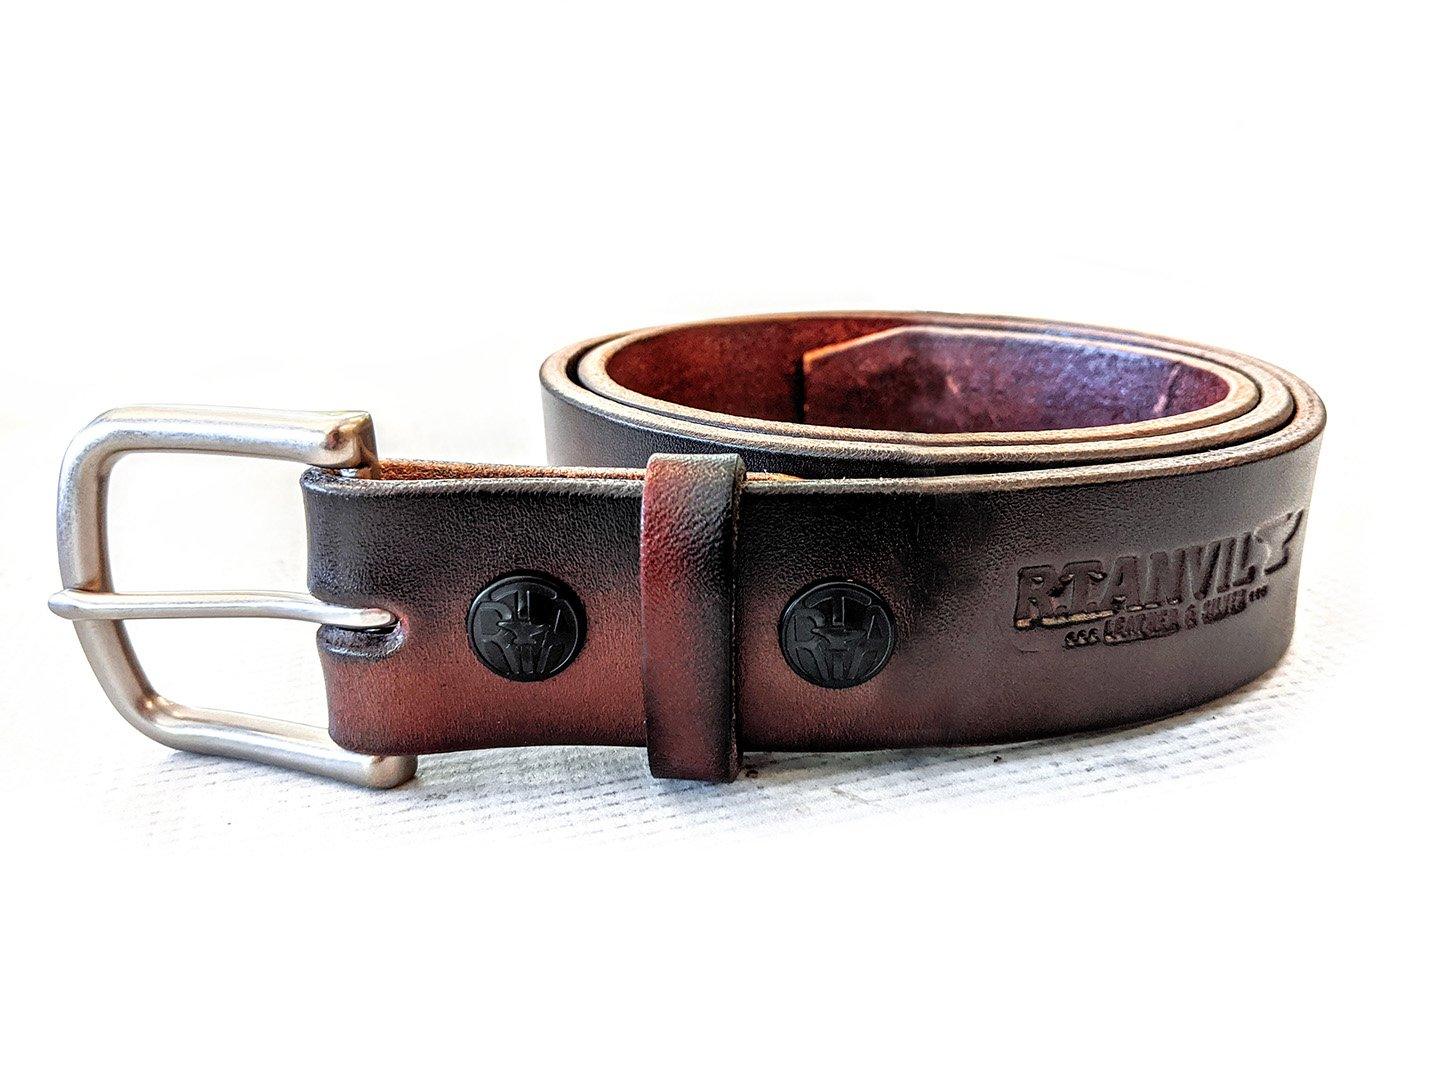 Mens Brown Leather Belt [Handmade] [Personalized]